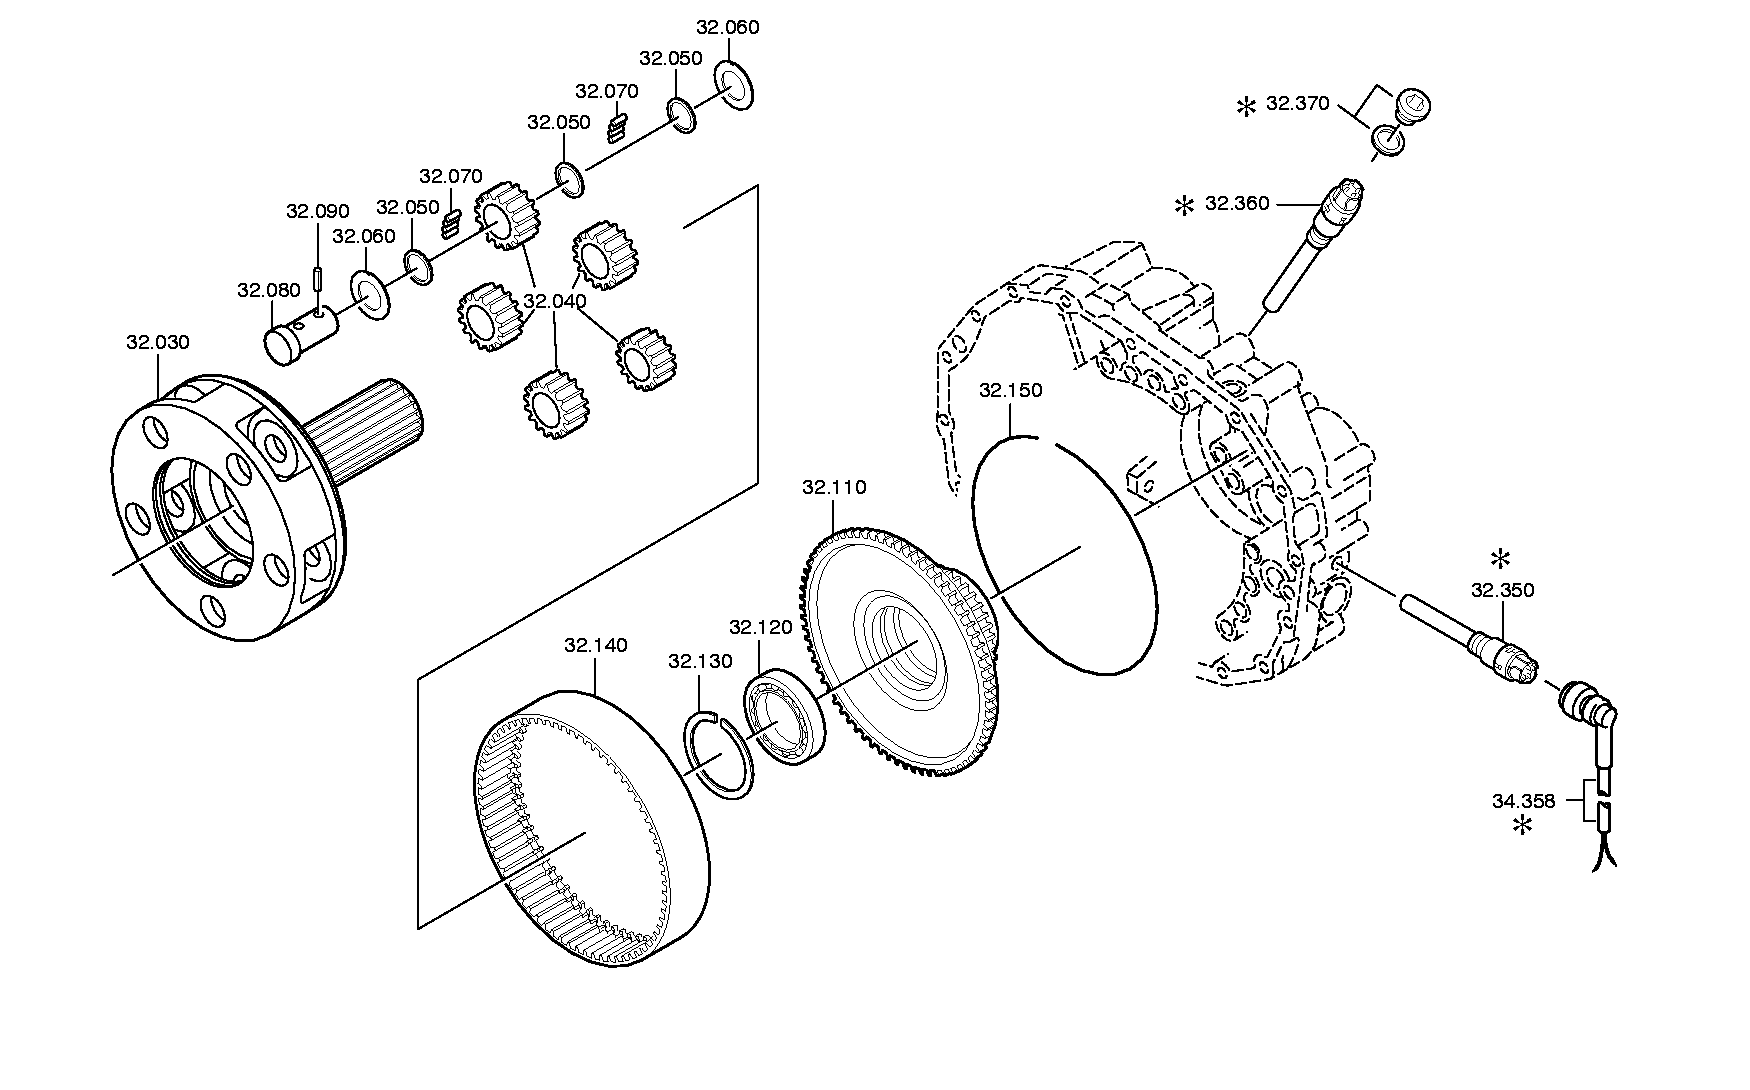 drawing for ALVIS VICKERS LTD. 1905286 - BALL BEARING (figure 3)